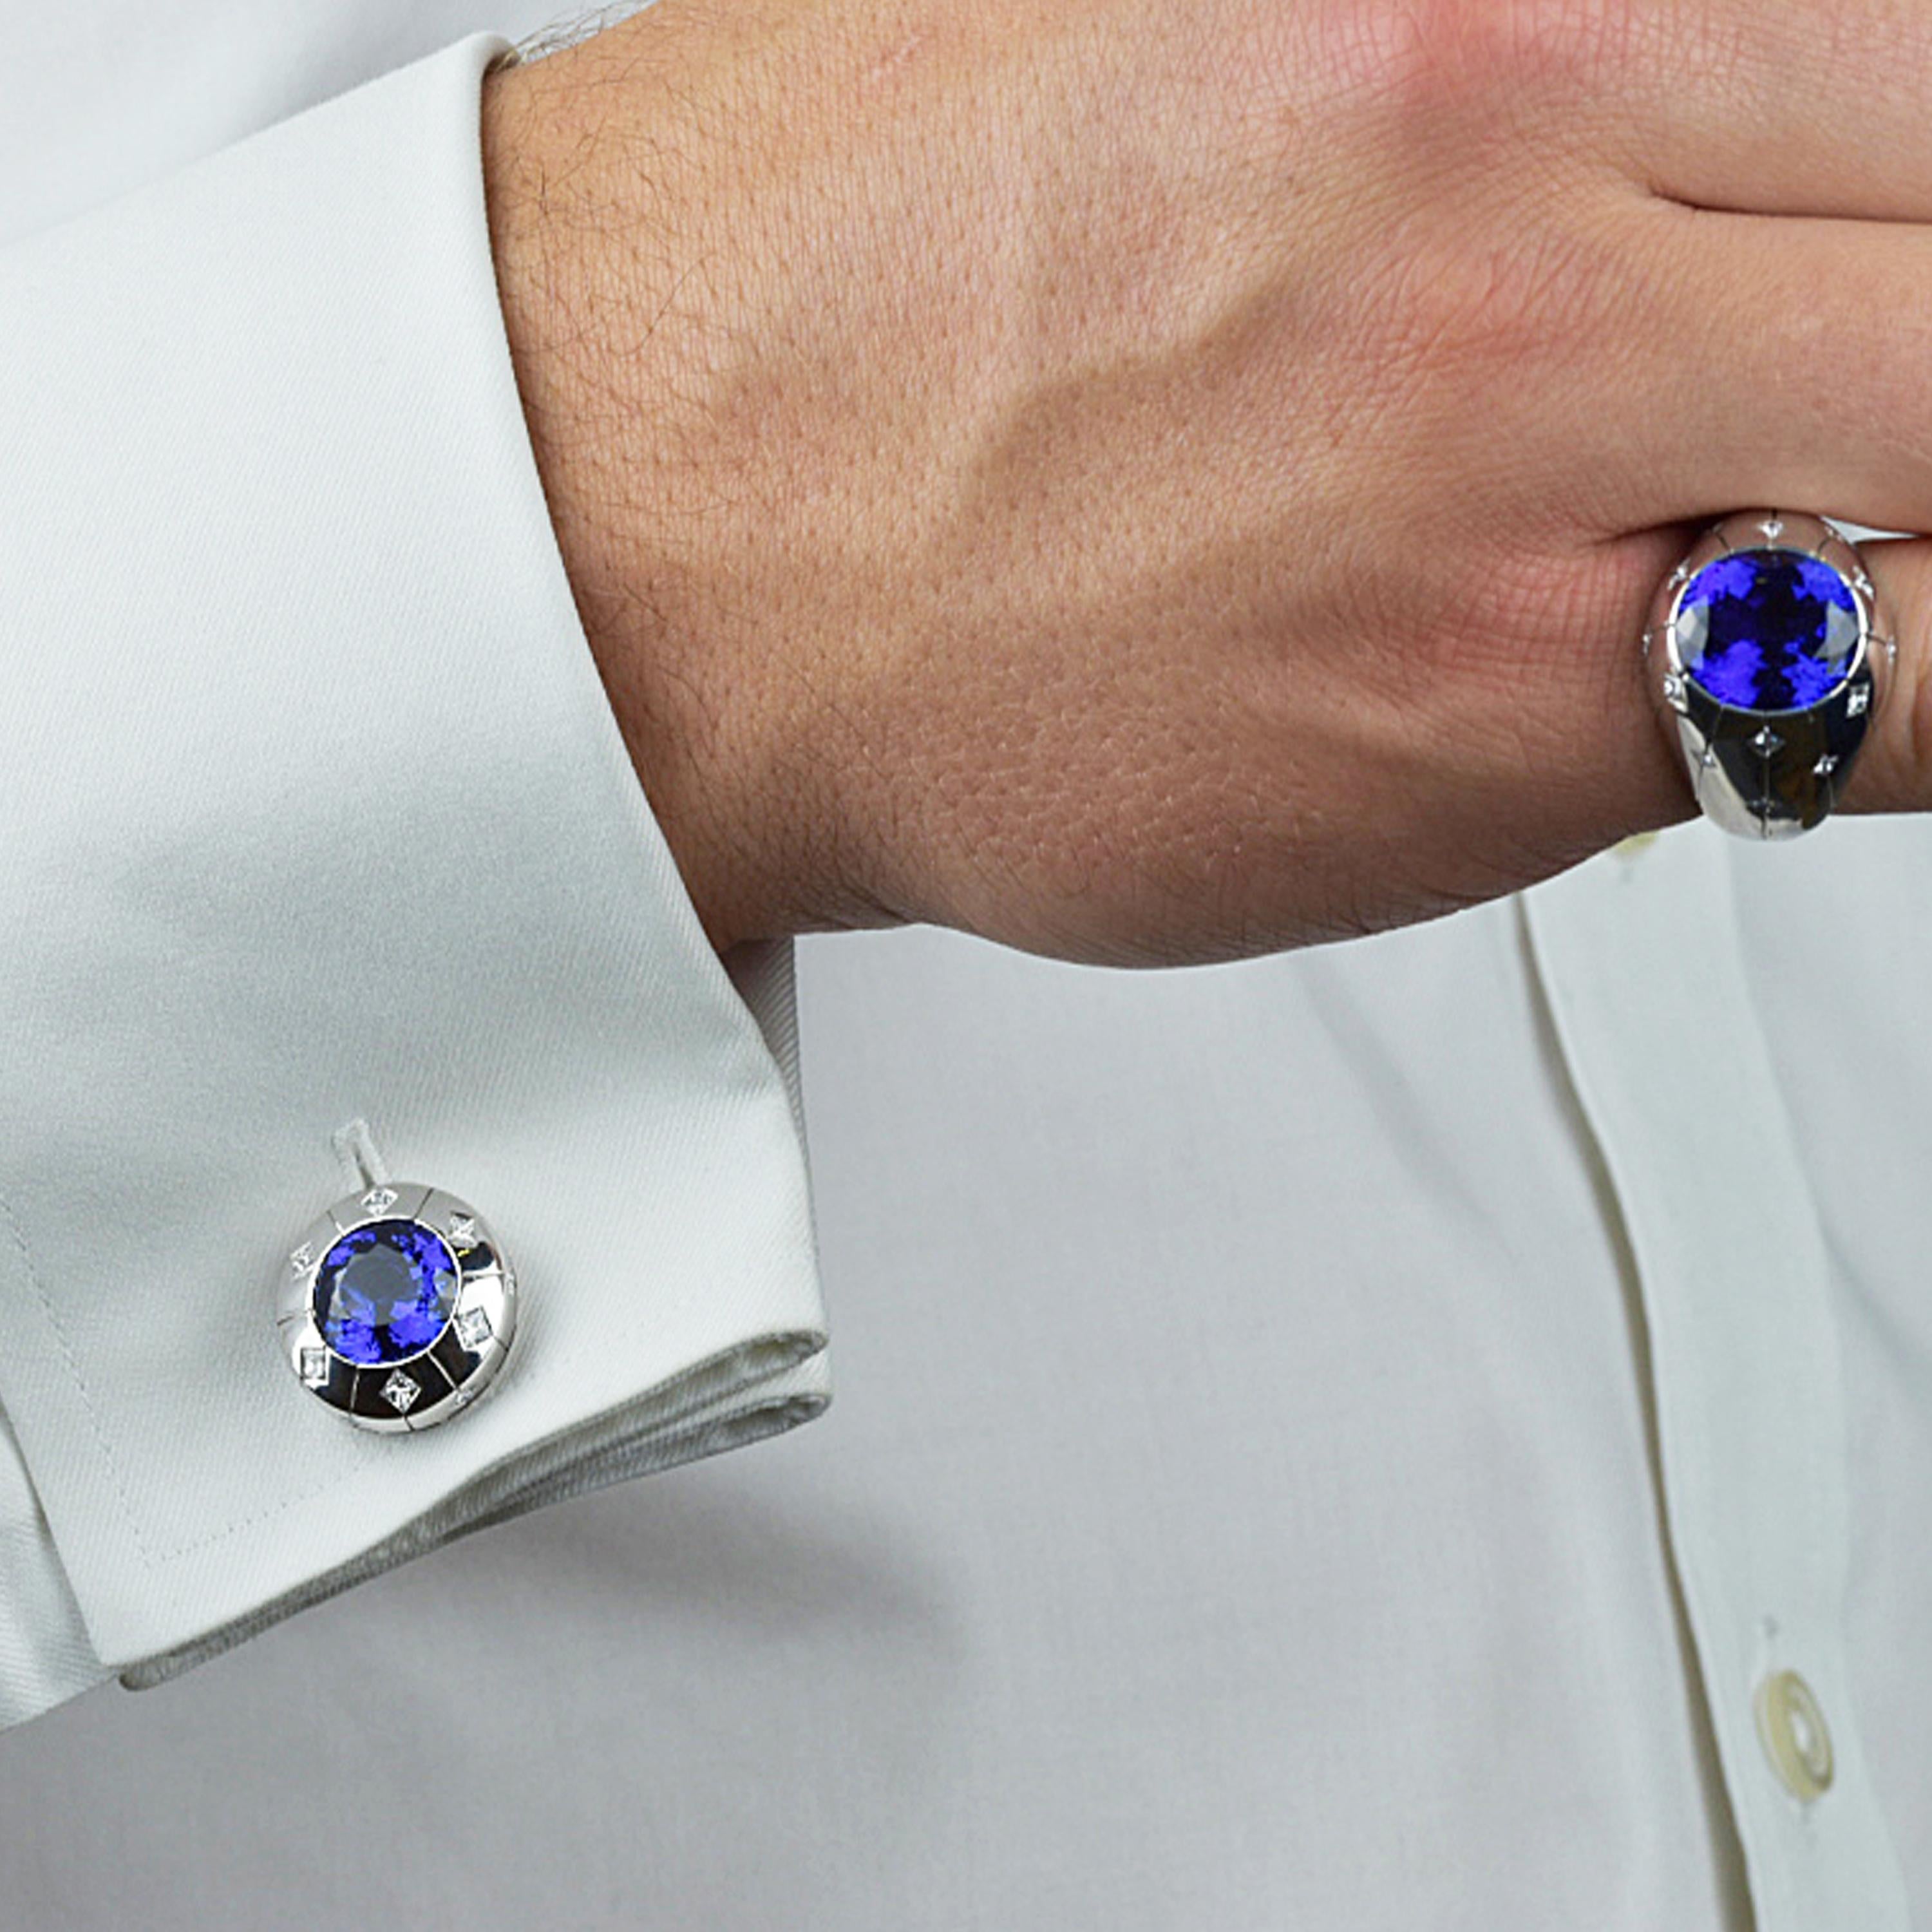 Matthew Cambery 18K White Gold Cufflinks set with stunning luxurious Oval Tanzanites totalling 13.29 Carat with further beautification of Princess Cut Diamonds totalling 1.47 Carats. T Bar fitting with oval backplate.
Matthew Cambery 18K White Gold